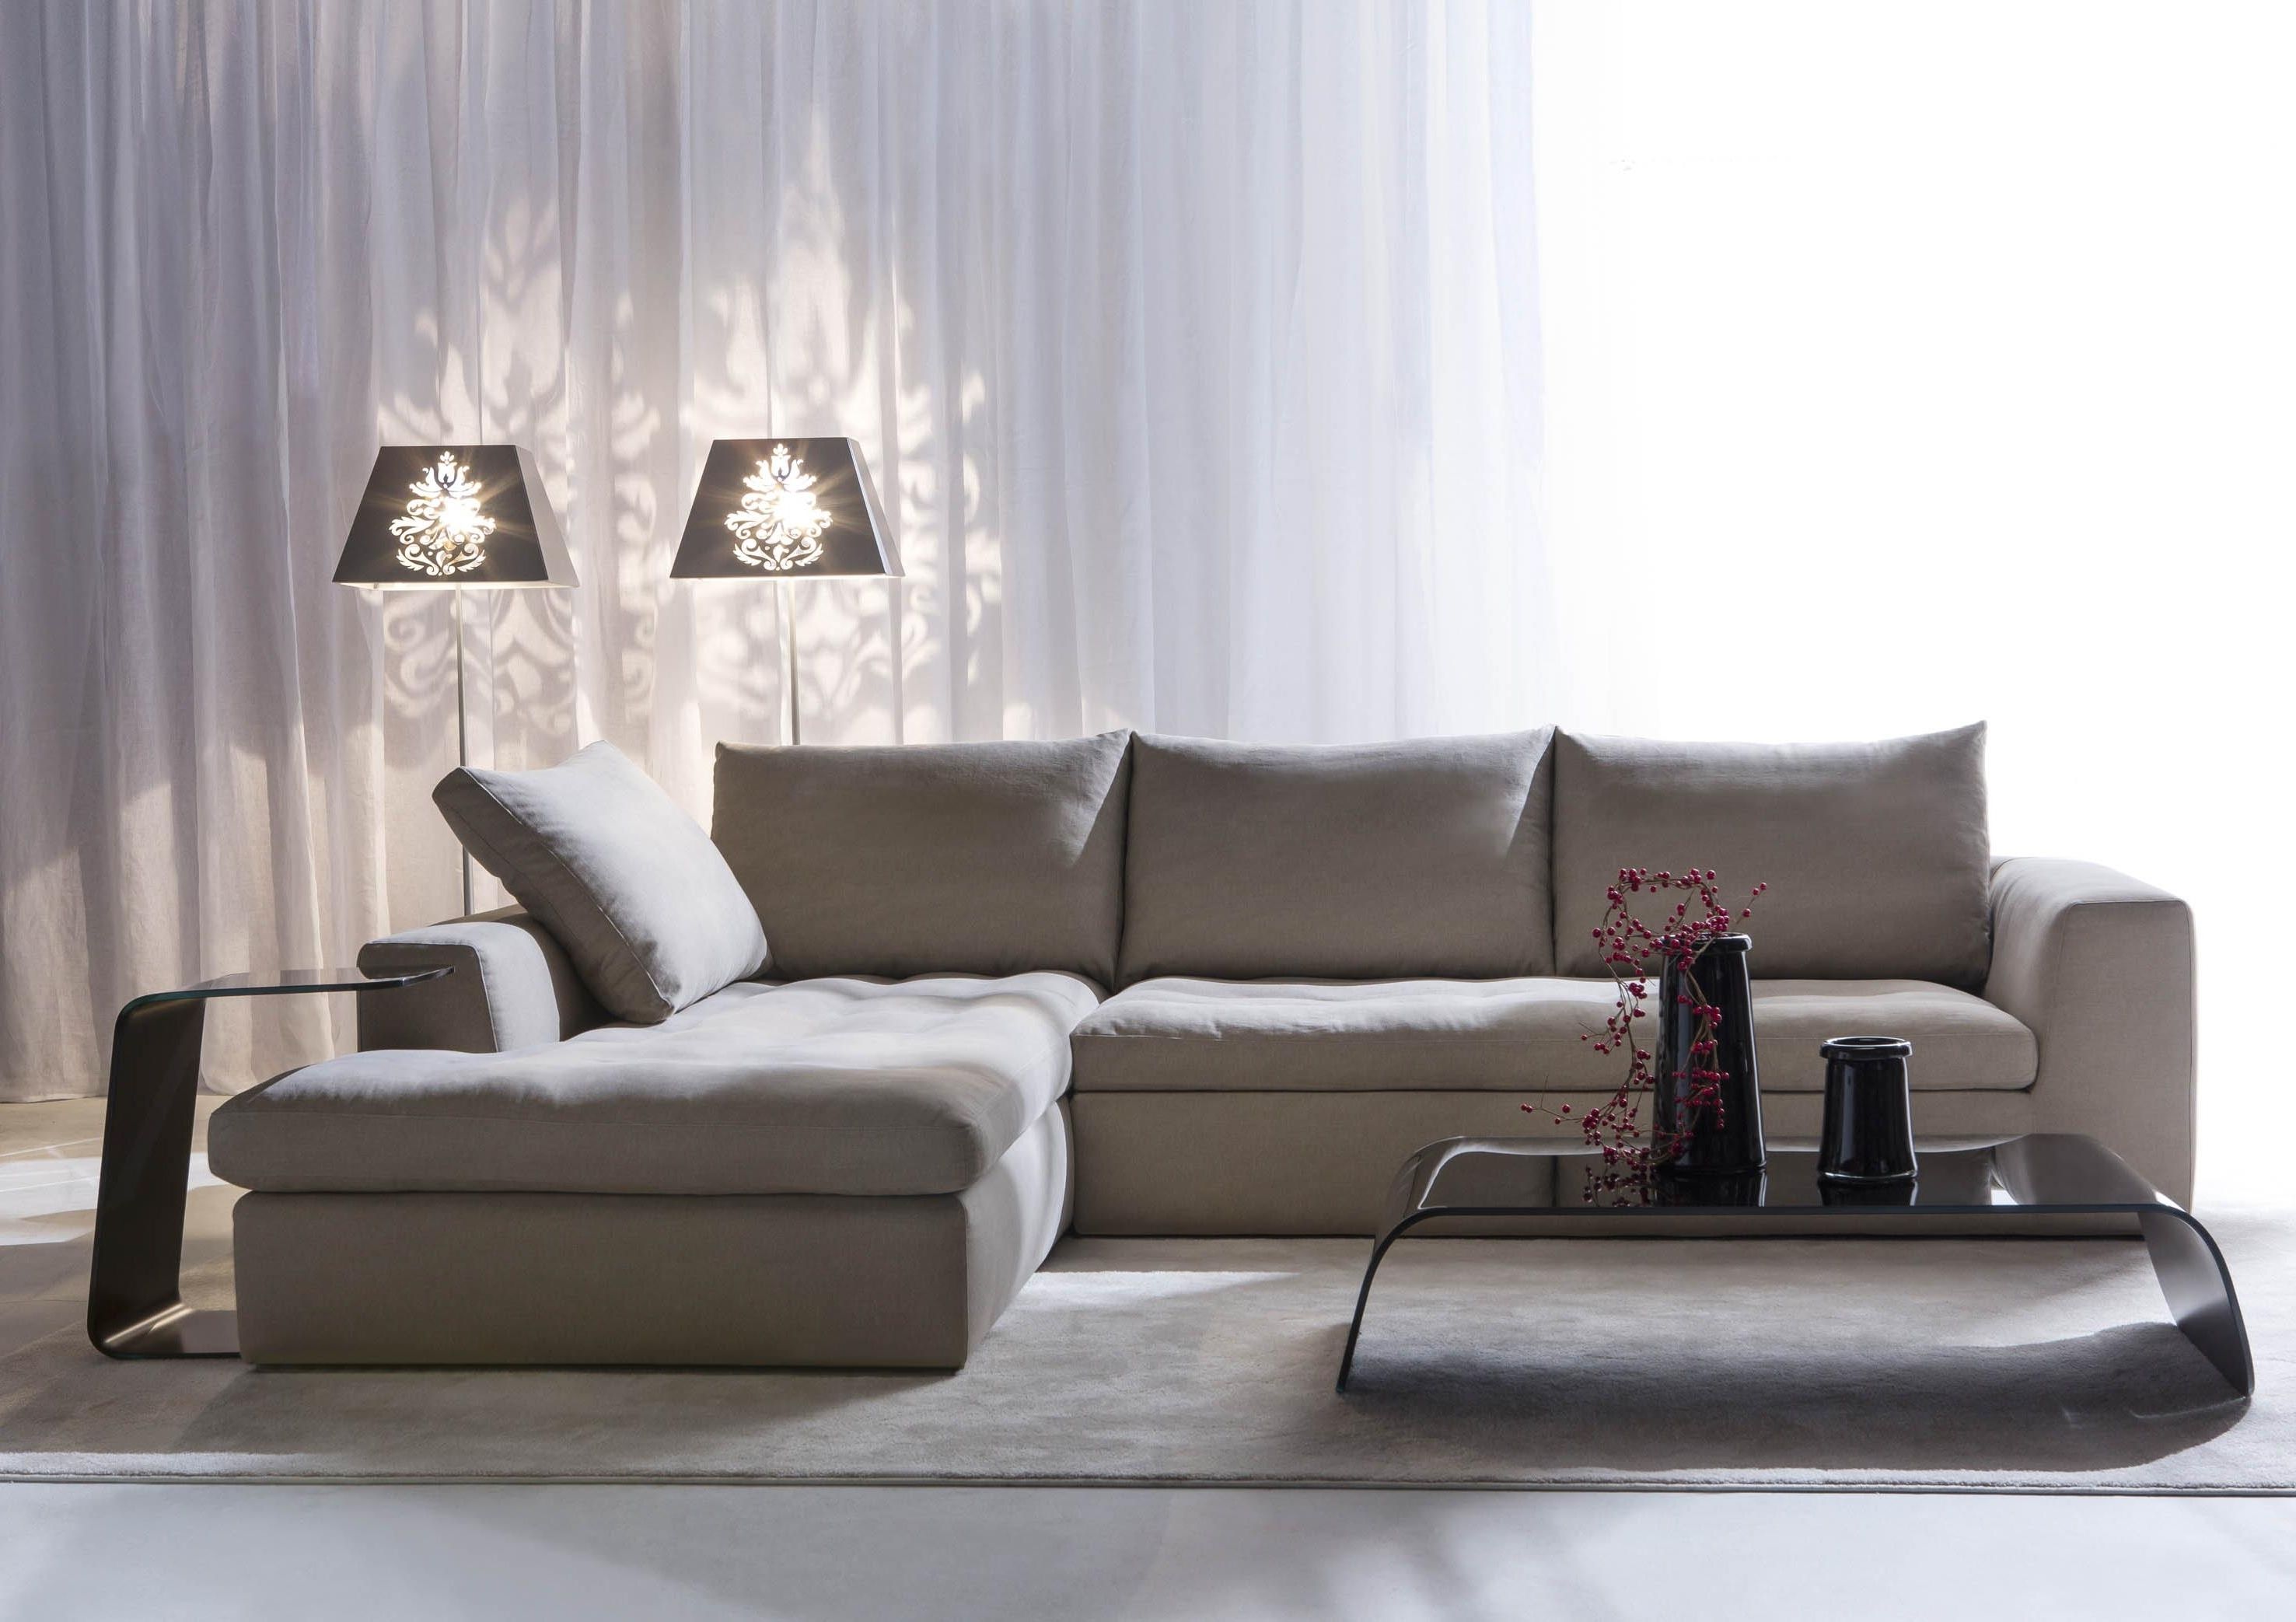 Sectional Sofa Design: Most High Class Wide Sectional Sofas Wide Pertaining To Fashionable Wide Sectional Sofas (View 1 of 20)